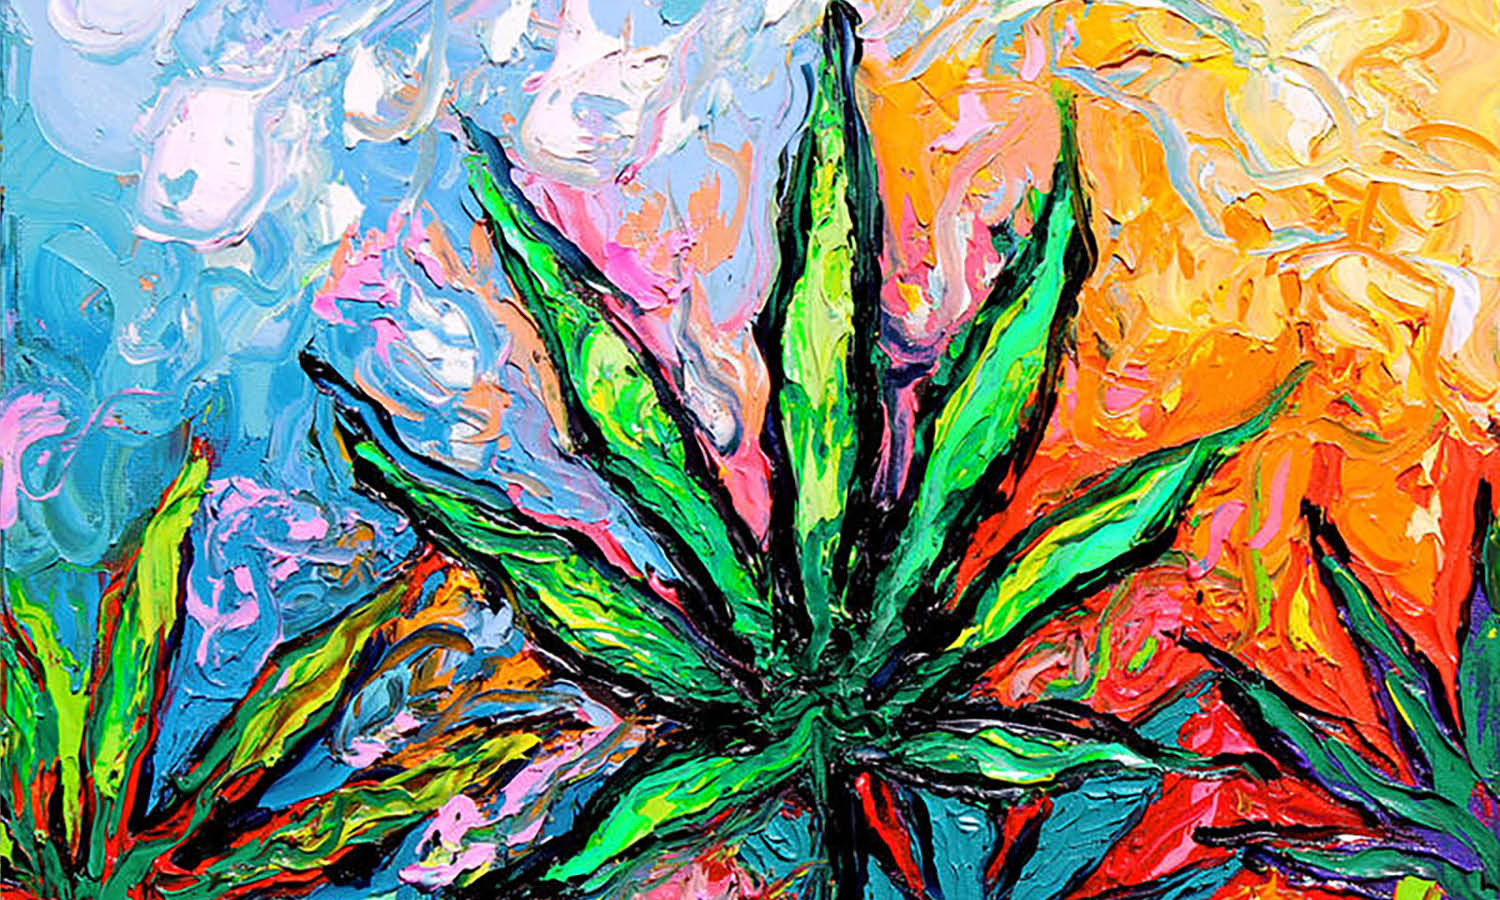 30 Best Cannabis Illustration Ideas You Should Check